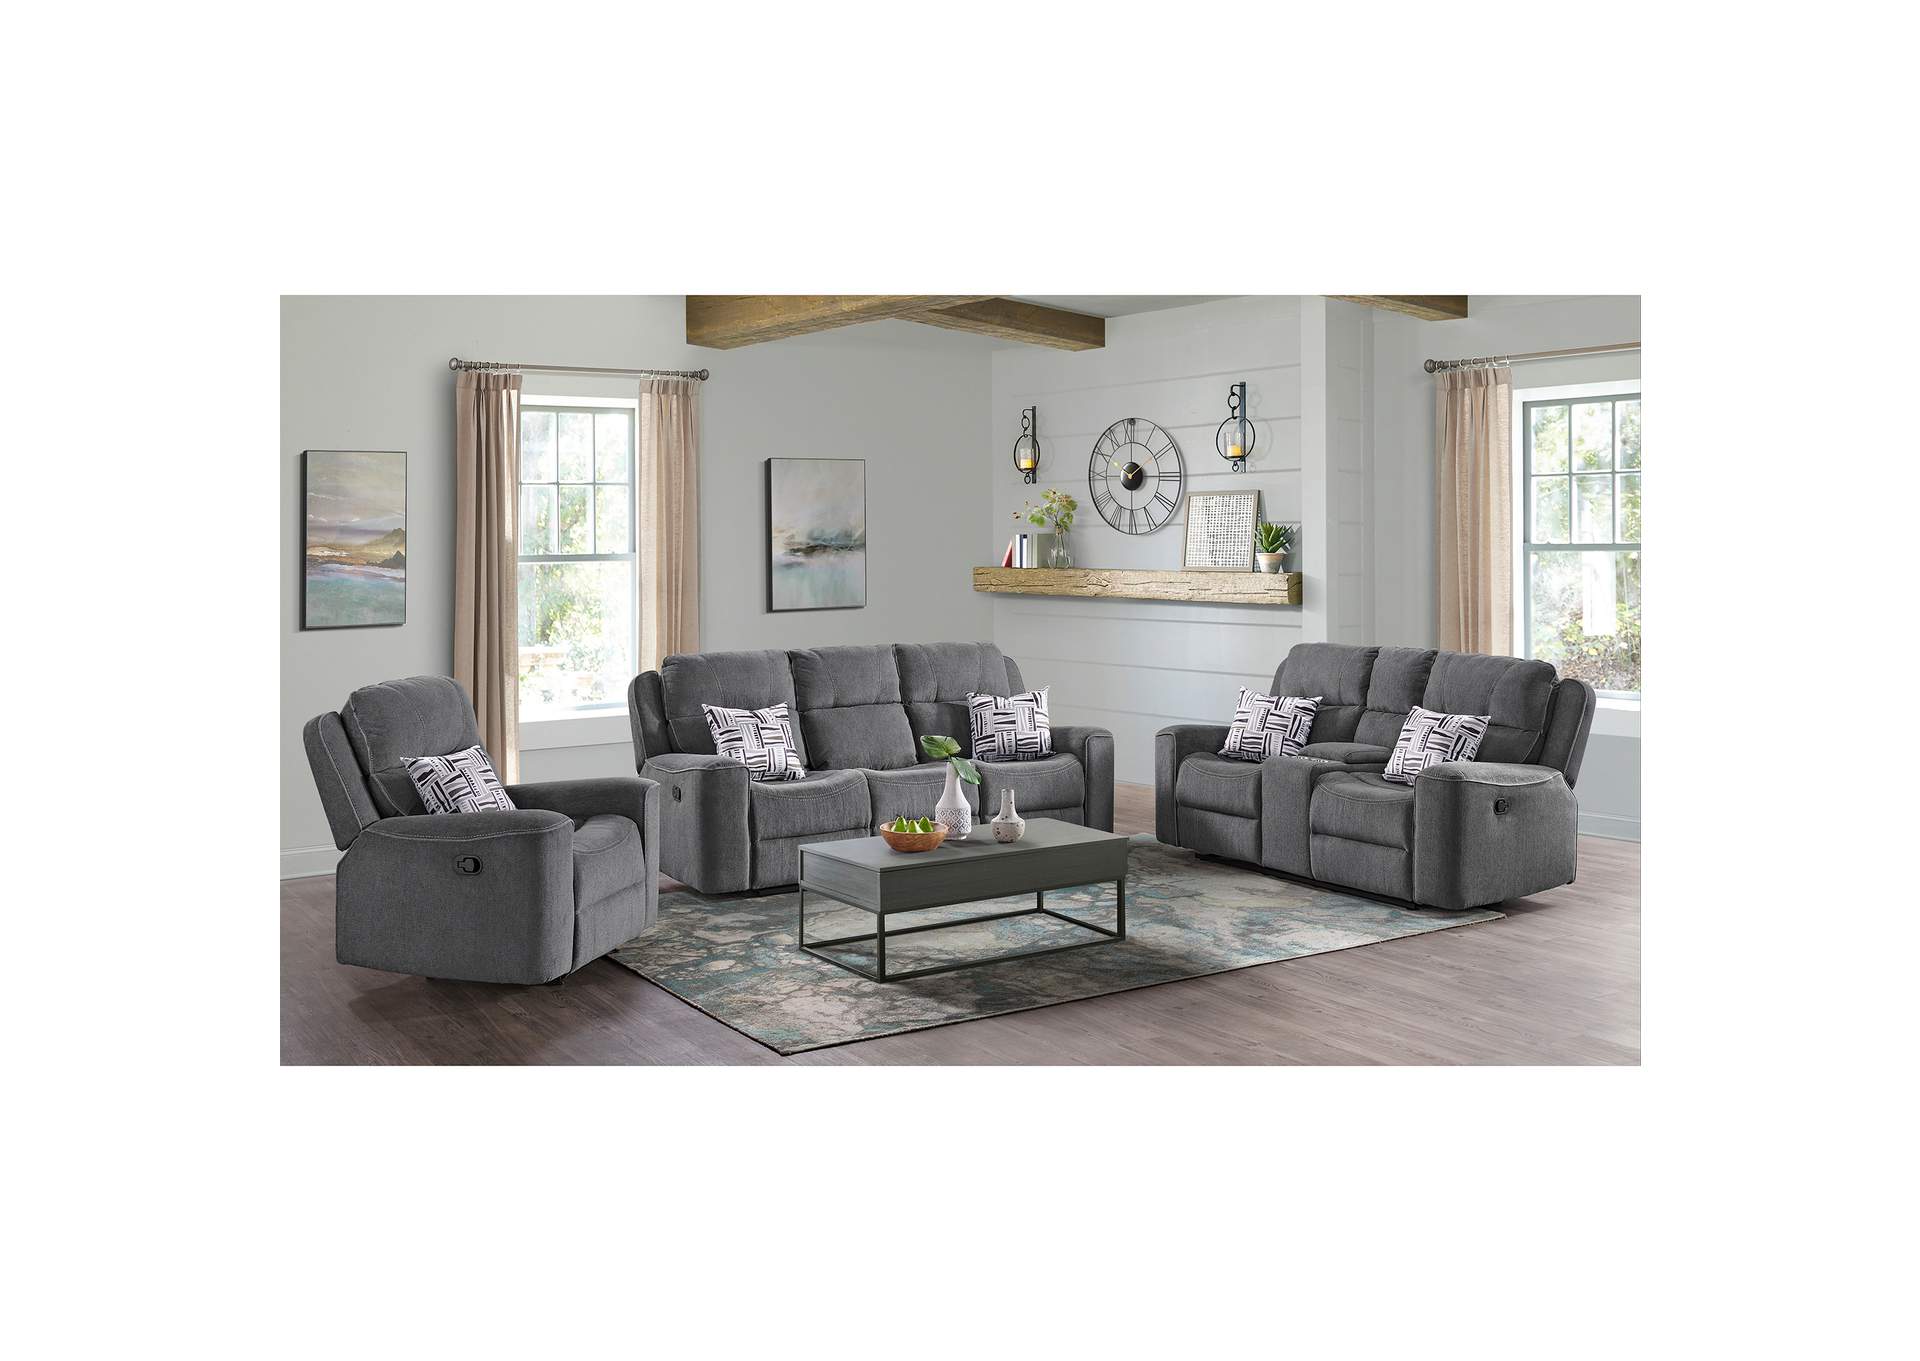 Connery Recliner In Pewter,Elements